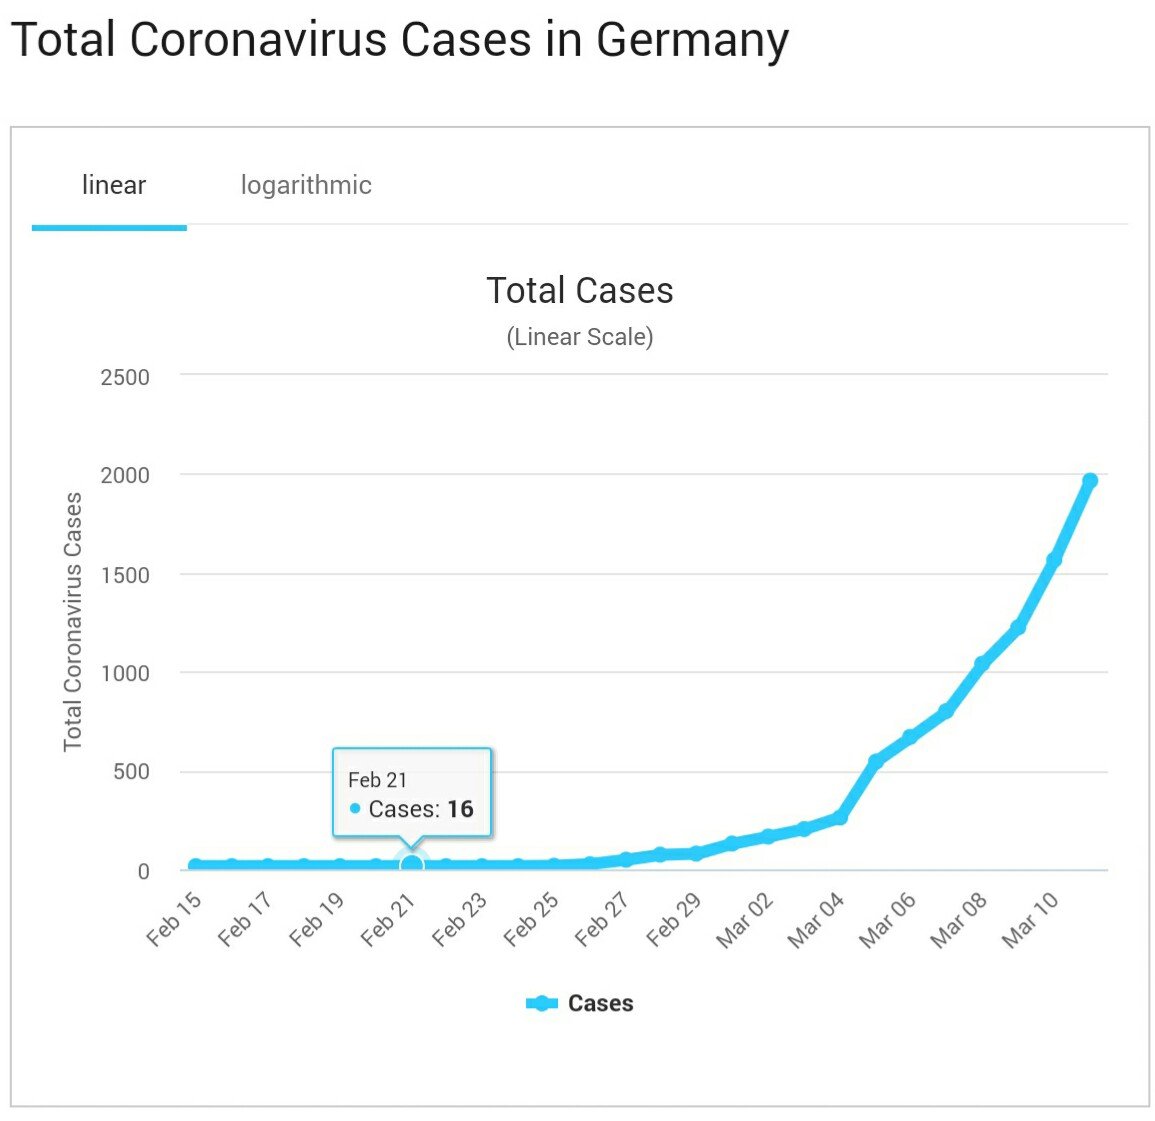 2020-02-21: Germany 16 cases